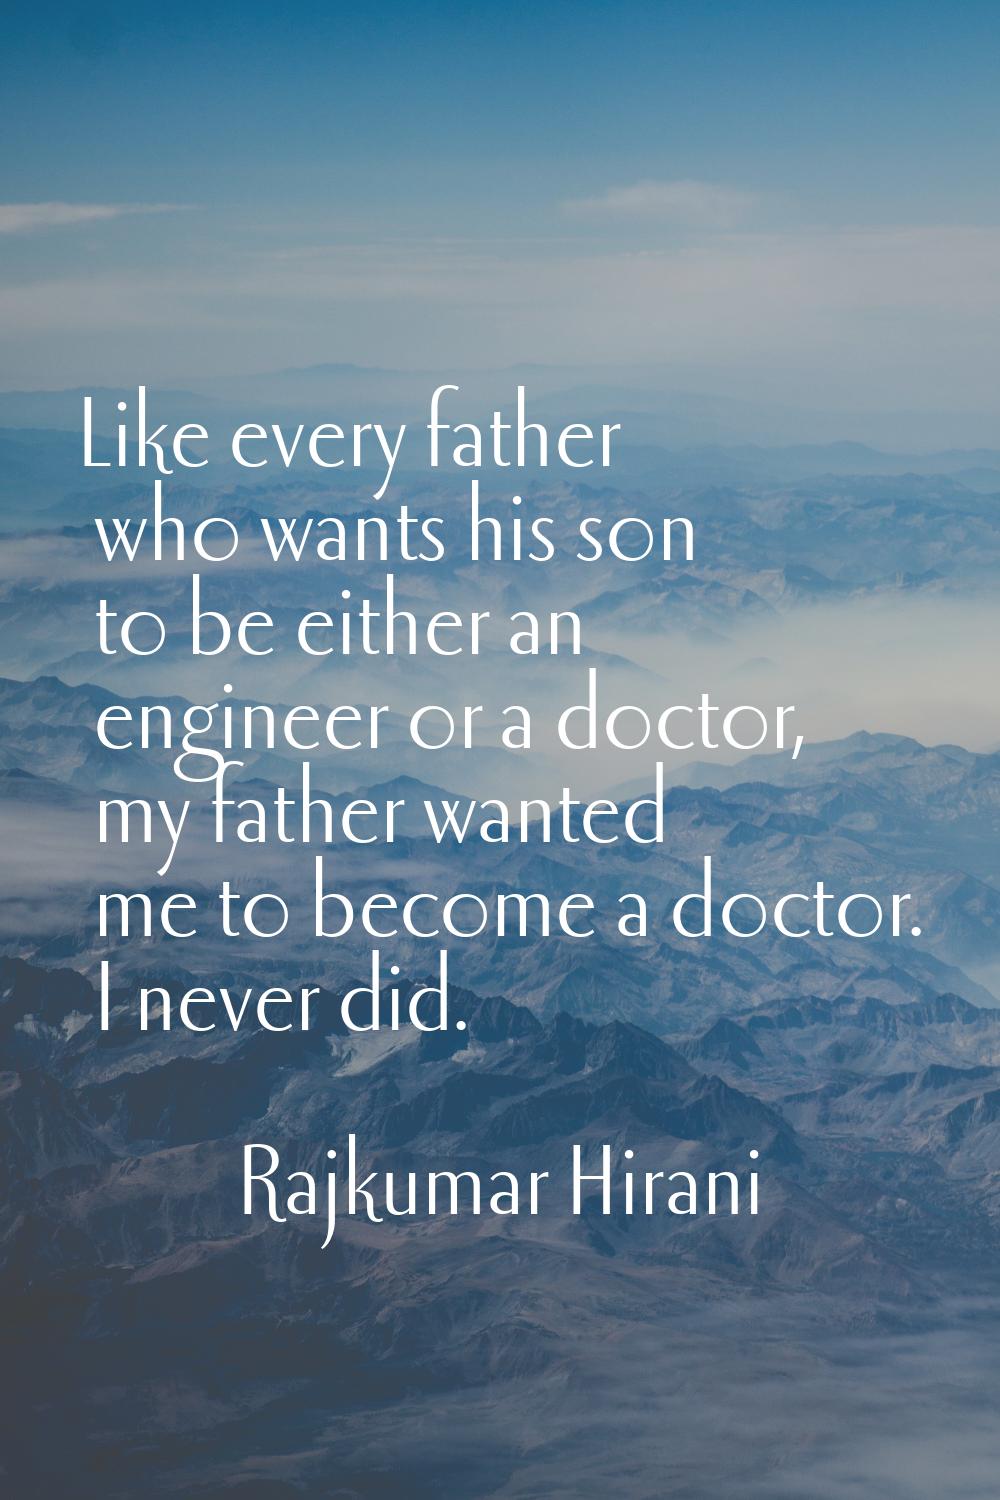 Like every father who wants his son to be either an engineer or a doctor, my father wanted me to be